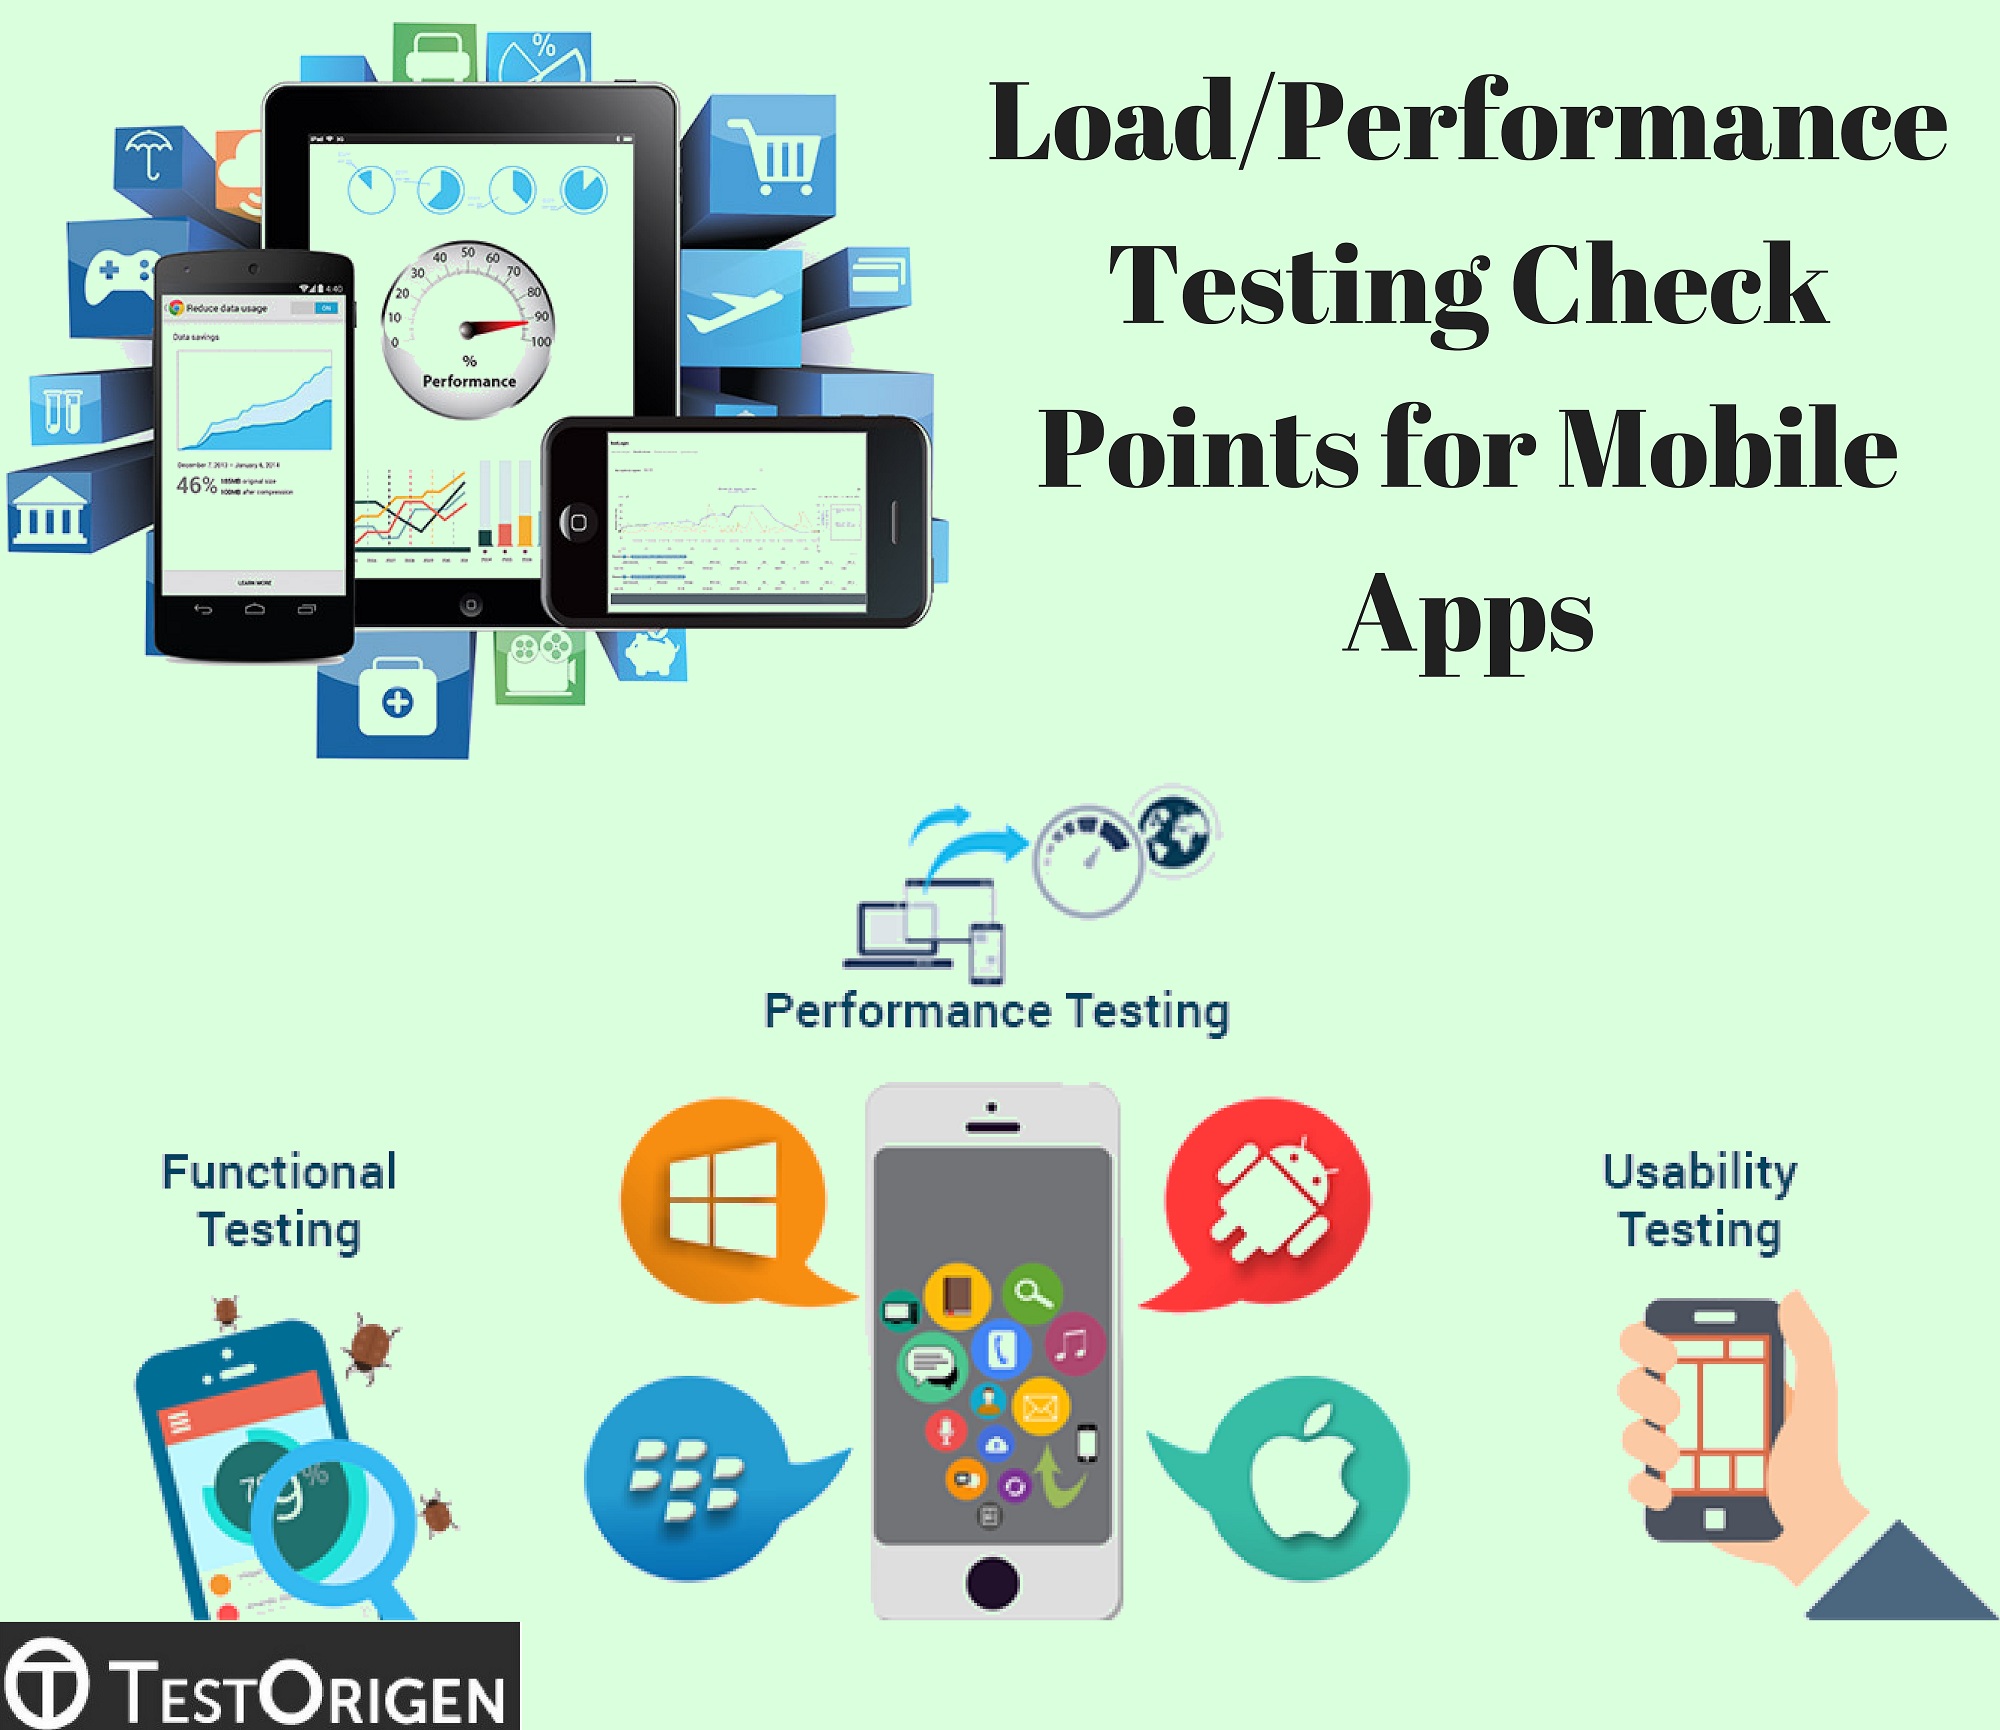 Performance testing for mobile apps